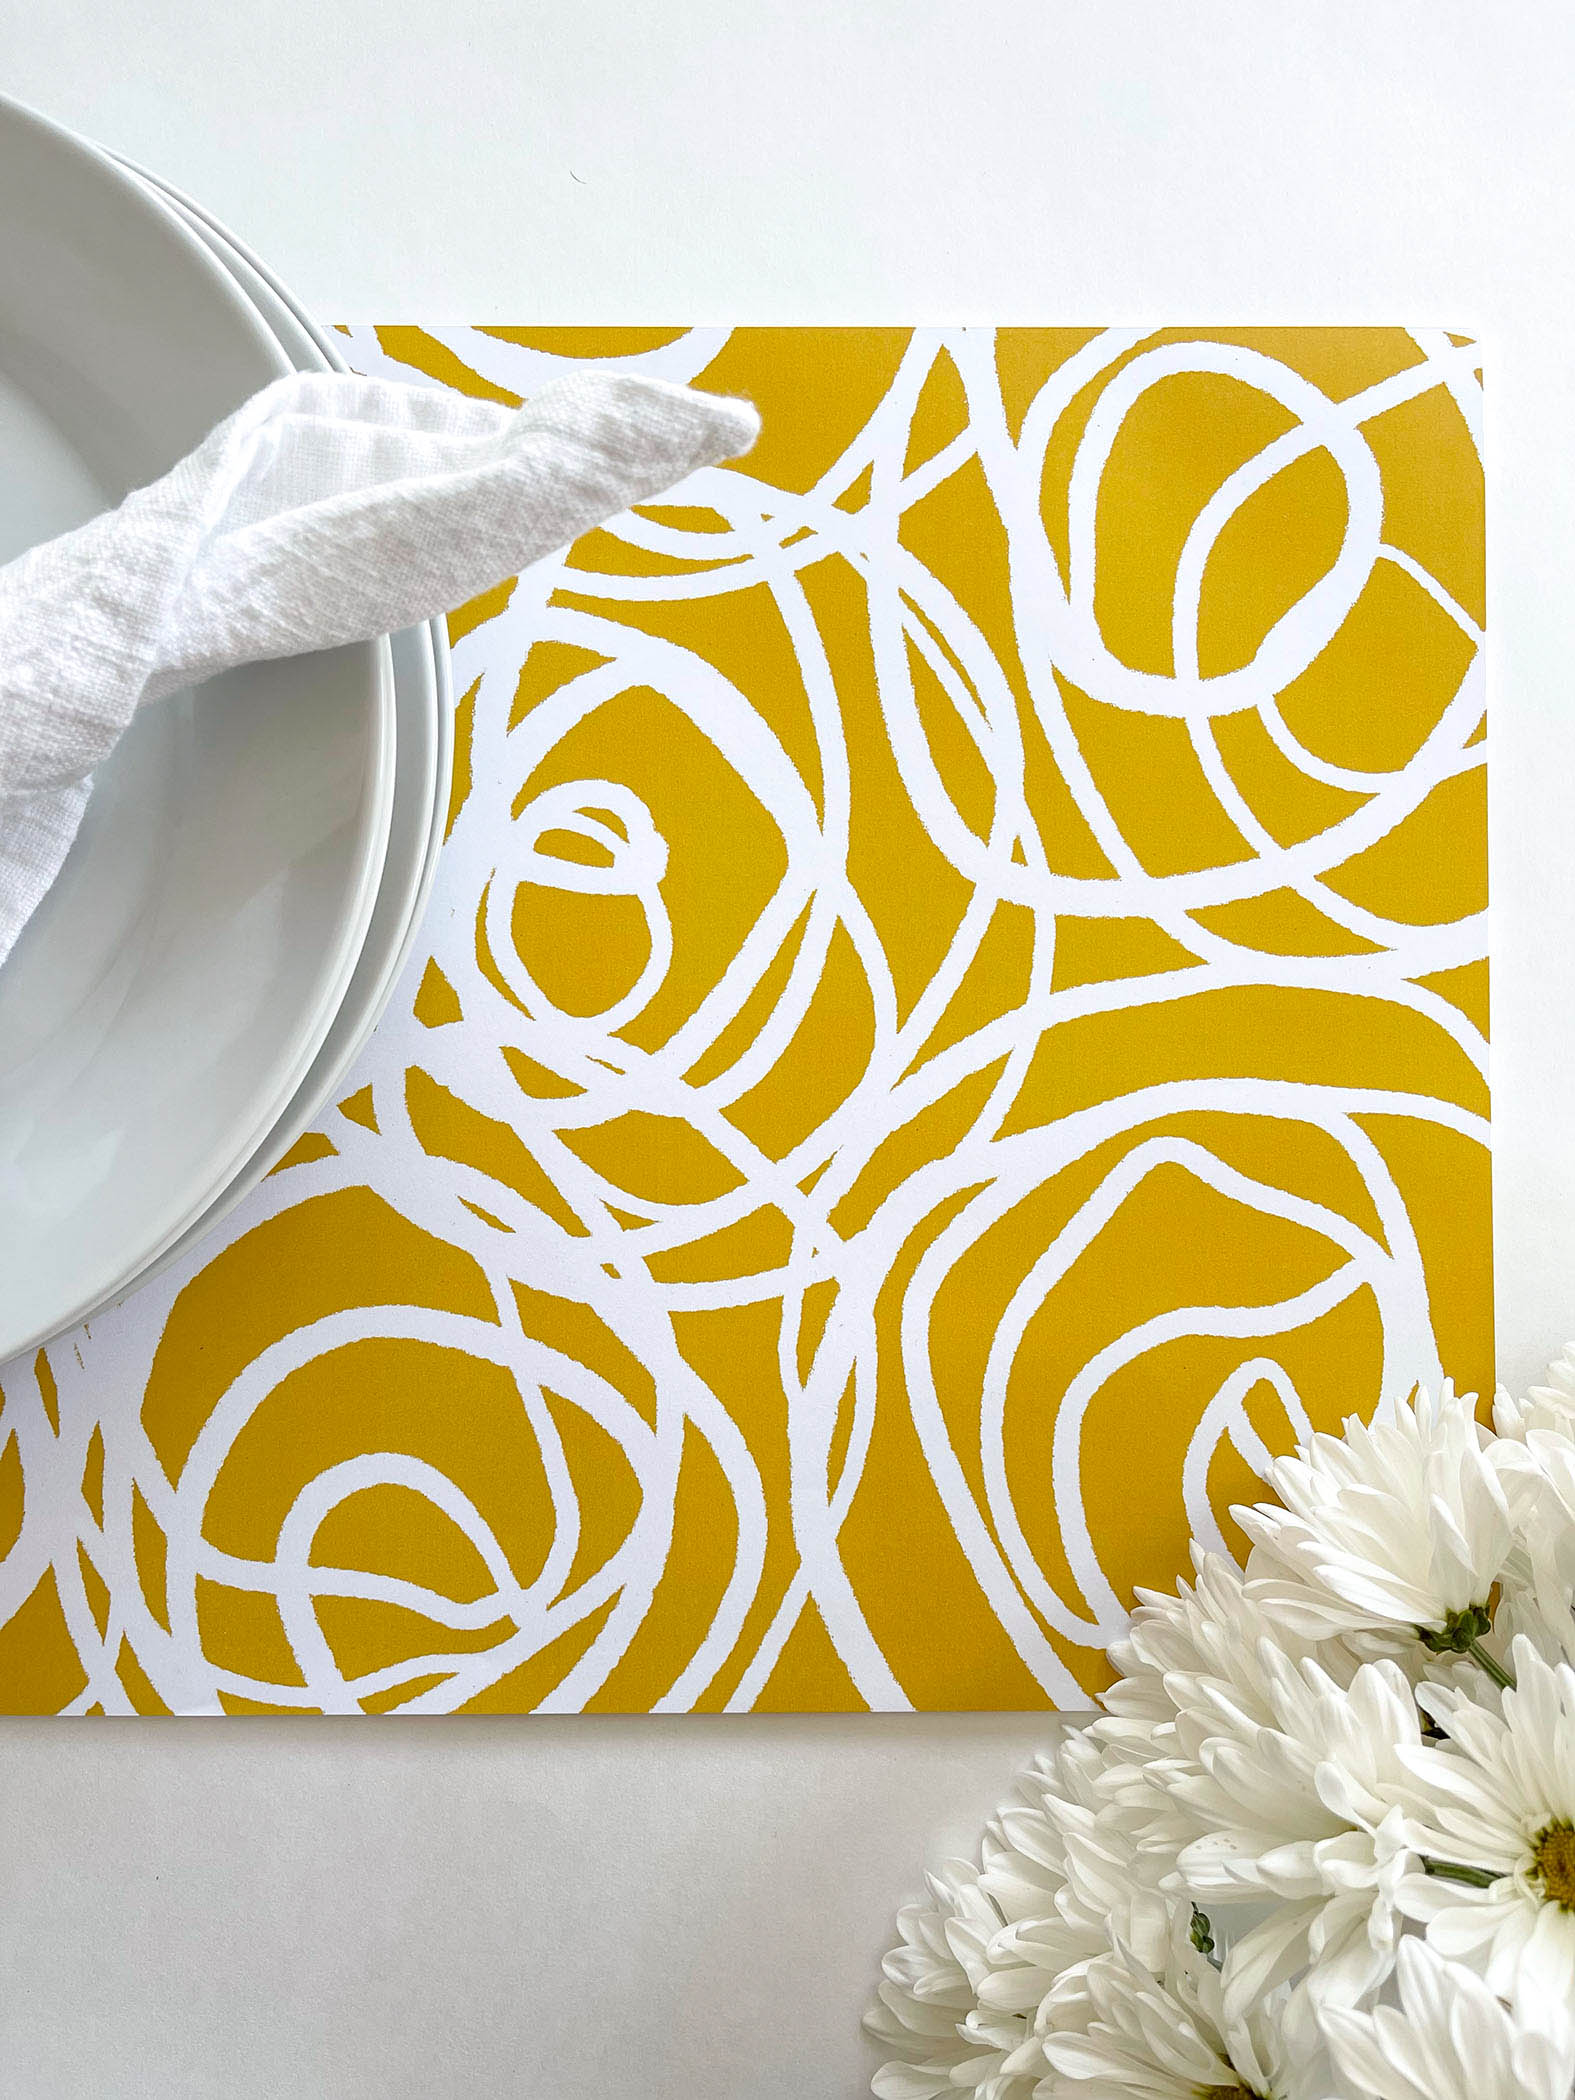 Swirl Paper Placemats are a bright and fun way to dress up any table.